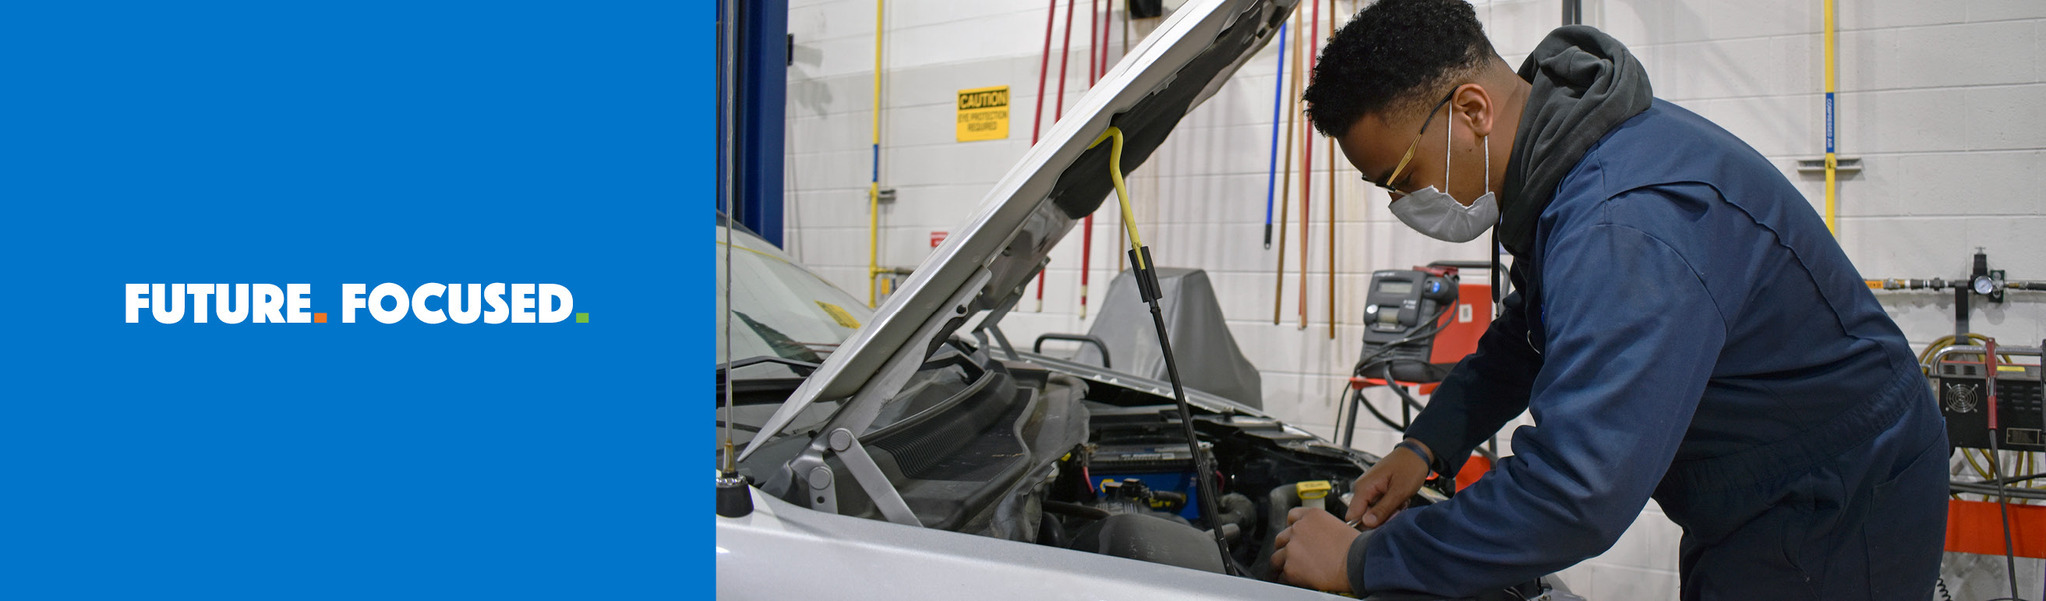 Auto Service Technology student looking under the hood of a vehicle